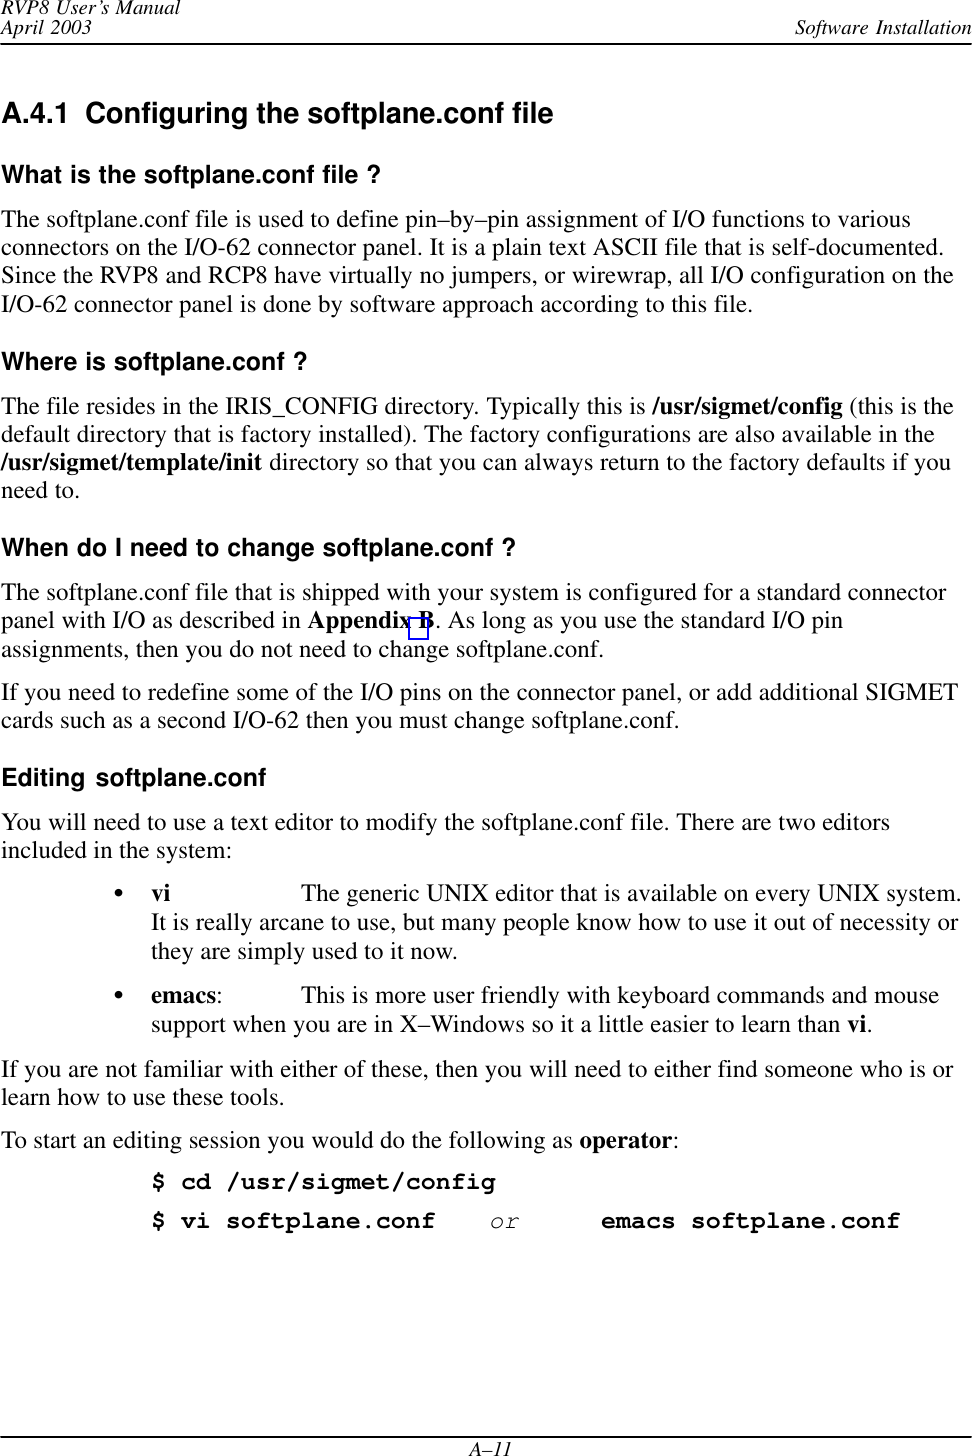 Software InstallationRVP8 User’s ManualApril 2003A–11A.4.1  Configuring the softplane.conf file What is the softplane.conf file ?The softplane.conf file is used to define pin–by–pin assignment of I/O functions to variousconnectors on the I/O-62 connector panel. It is a plain text ASCII file that is self-documented.Since the RVP8 and RCP8 have virtually no jumpers, or wirewrap, all I/O configuration on theI/O-62 connector panel is done by software approach according to this file.Where is softplane.conf ?The file resides in the IRIS_CONFIG directory. Typically this is /usr/sigmet/config (this is thedefault directory that is factory installed). The factory configurations are also available in the/usr/sigmet/template/init directory so that you can always return to the factory defaults if youneed to.When do I need to change softplane.conf ?The softplane.conf file that is shipped with your system is configured for a standard connectorpanel with I/O as described in Appendix B. As long as you use the standard I/O pinassignments, then you do not need to change softplane.conf.If you need to redefine some of the I/O pins on the connector panel, or add additional SIGMETcards such as a second I/O-62 then you must change softplane.conf.Editing softplane.confYou will need to use a text editor to modify the softplane.conf file. There are two editorsincluded in the system:vi The generic UNIX editor that is available on every UNIX system.It is really arcane to use, but many people know how to use it out of necessity orthey are simply used to it now.emacs:  This is more user friendly with keyboard commands and mousesupport when you are in X–Windows so it a little easier to learn than vi.If you are not familiar with either of these, then you will need to either find someone who is orlearn how to use these tools.To start an editing session you would do the following as operator:$ cd /usr/sigmet/config$ vi softplane.conforemacs softplane.conf